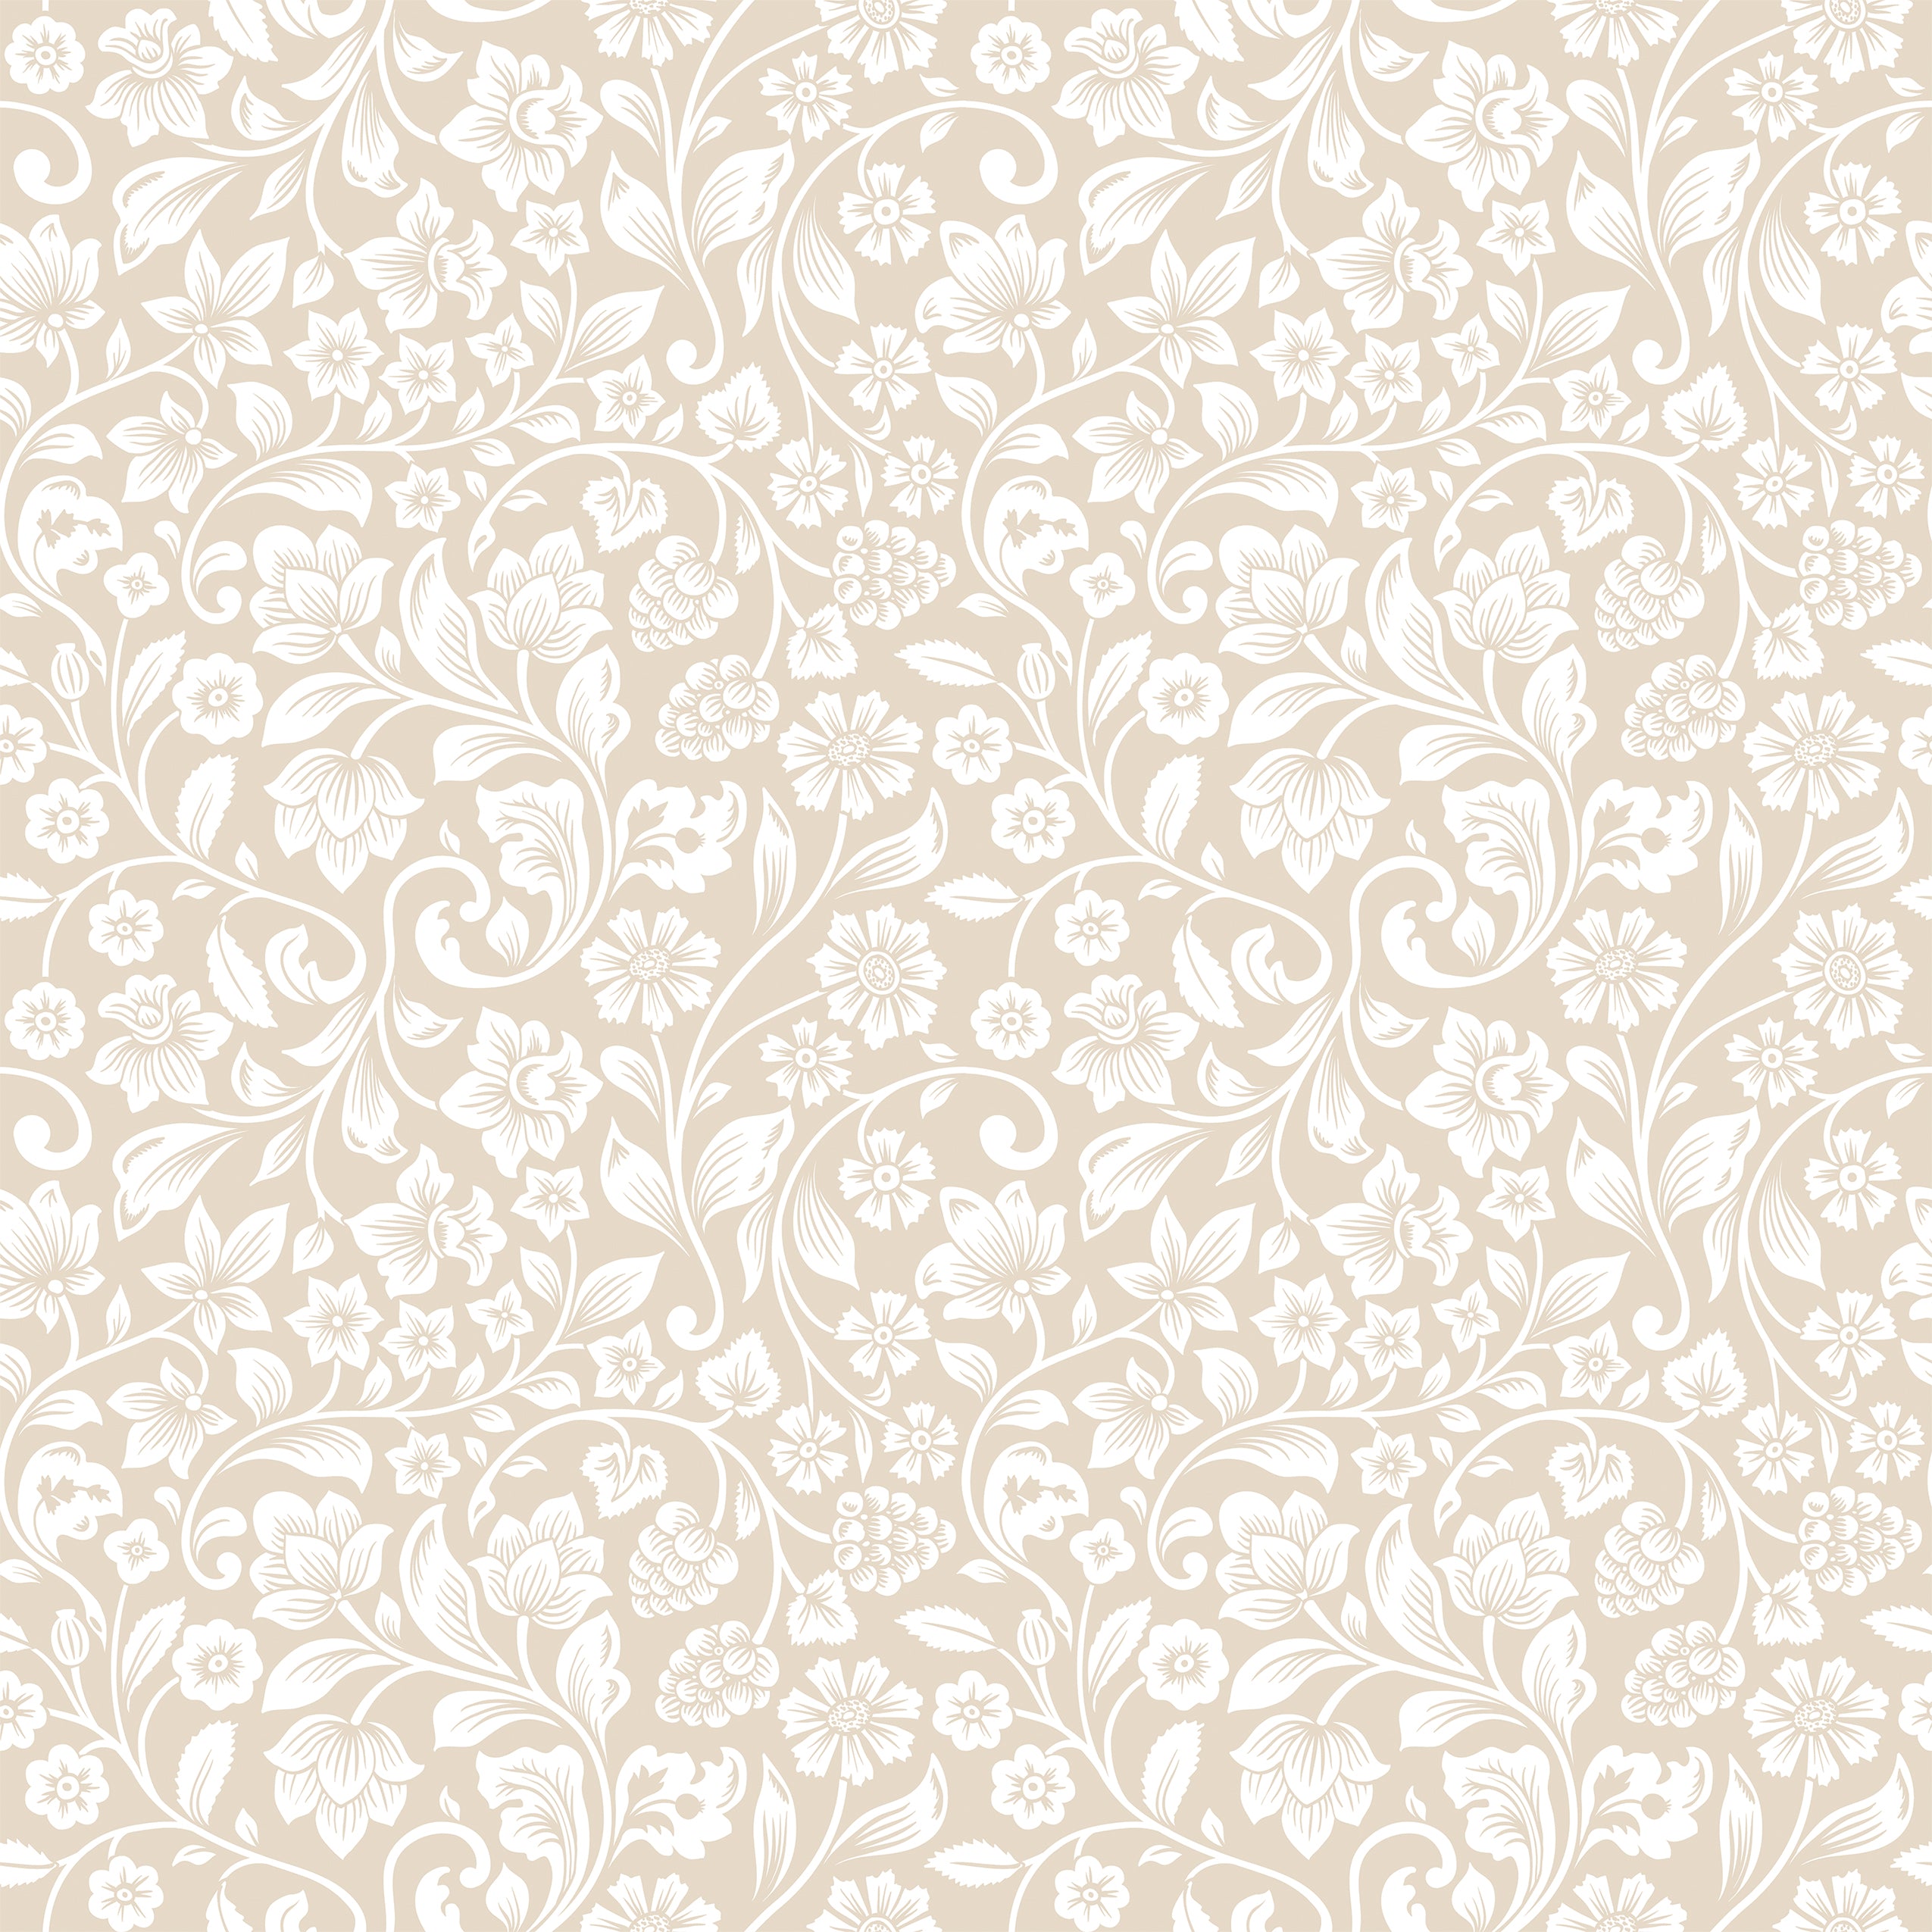 A seamless pattern of the 'Vintage Floral Wallpaper' featuring an elegant array of flowers and vines in shades of beige on an off-white background, conveying a classic and timeless design